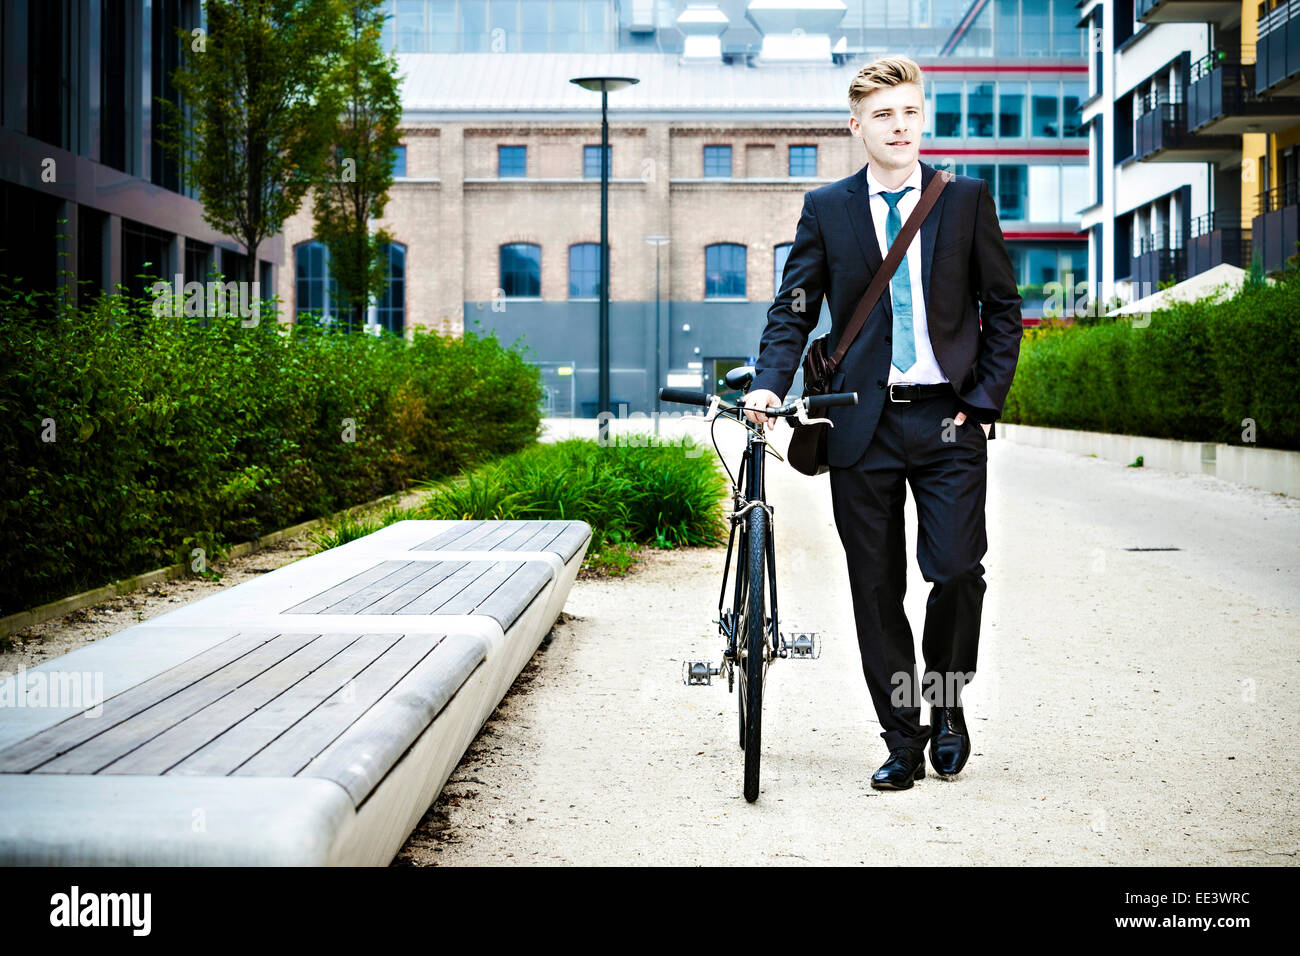 Young businessman riding bicycle, Munich, Bavaria, Germany Stock Photo